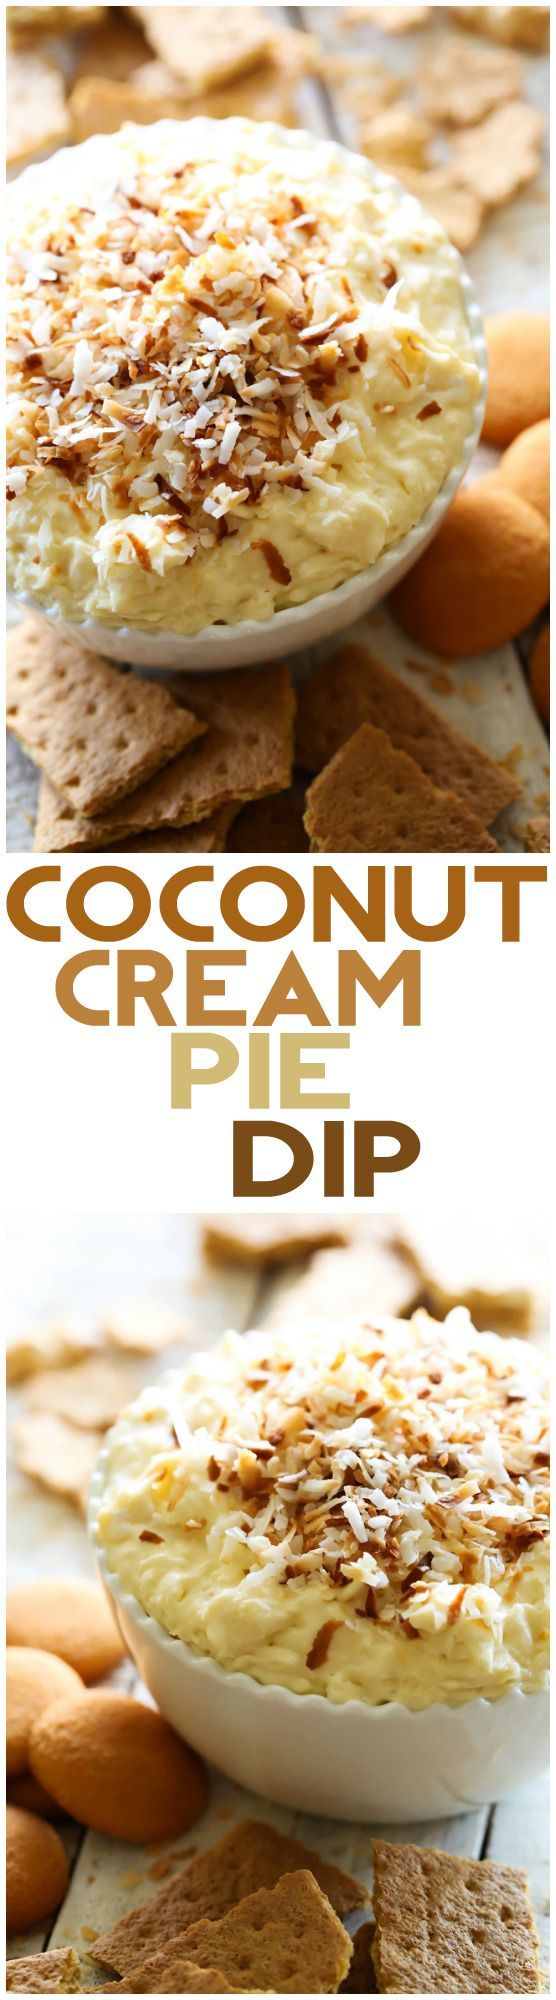 This Coconut Cream Pie Dip is seriously INCREDIBLE! The most delicious coconut cream pie transformed into one unforgettable